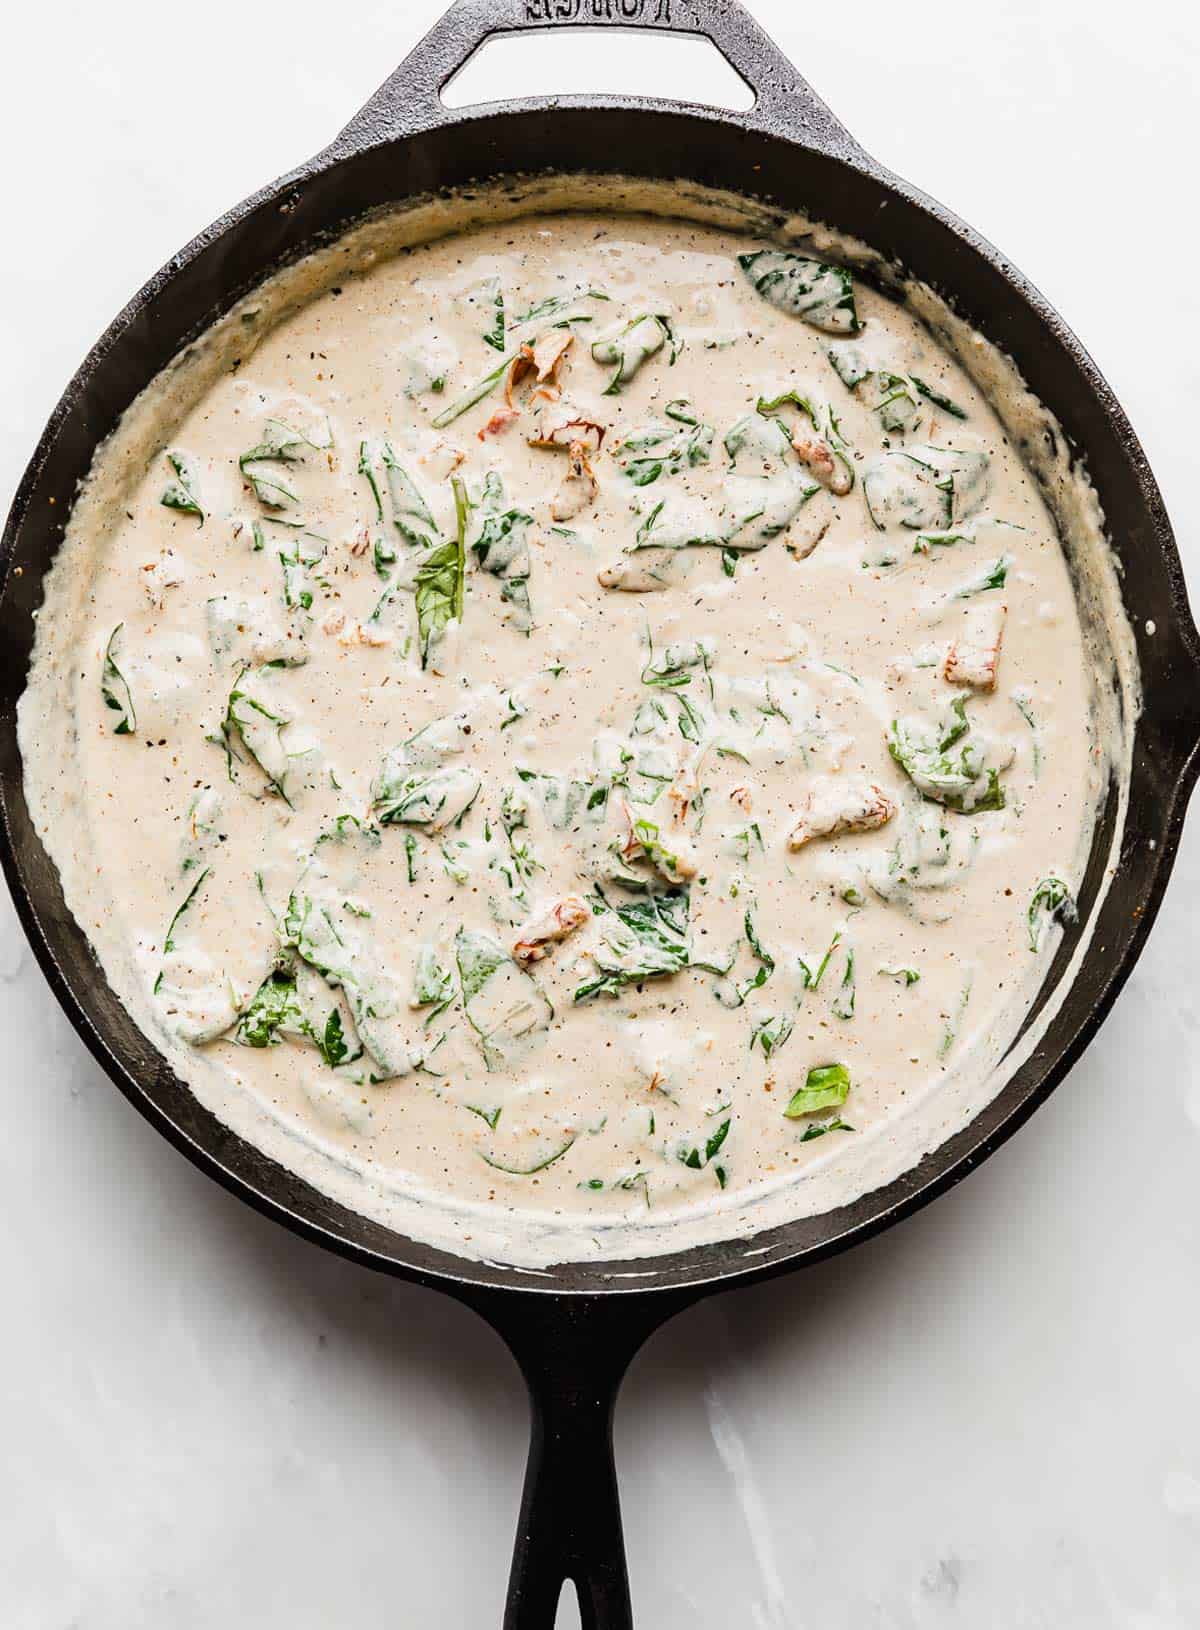 Creamy Tuscan Chicken gravy with spinach in a cast iron skillet.